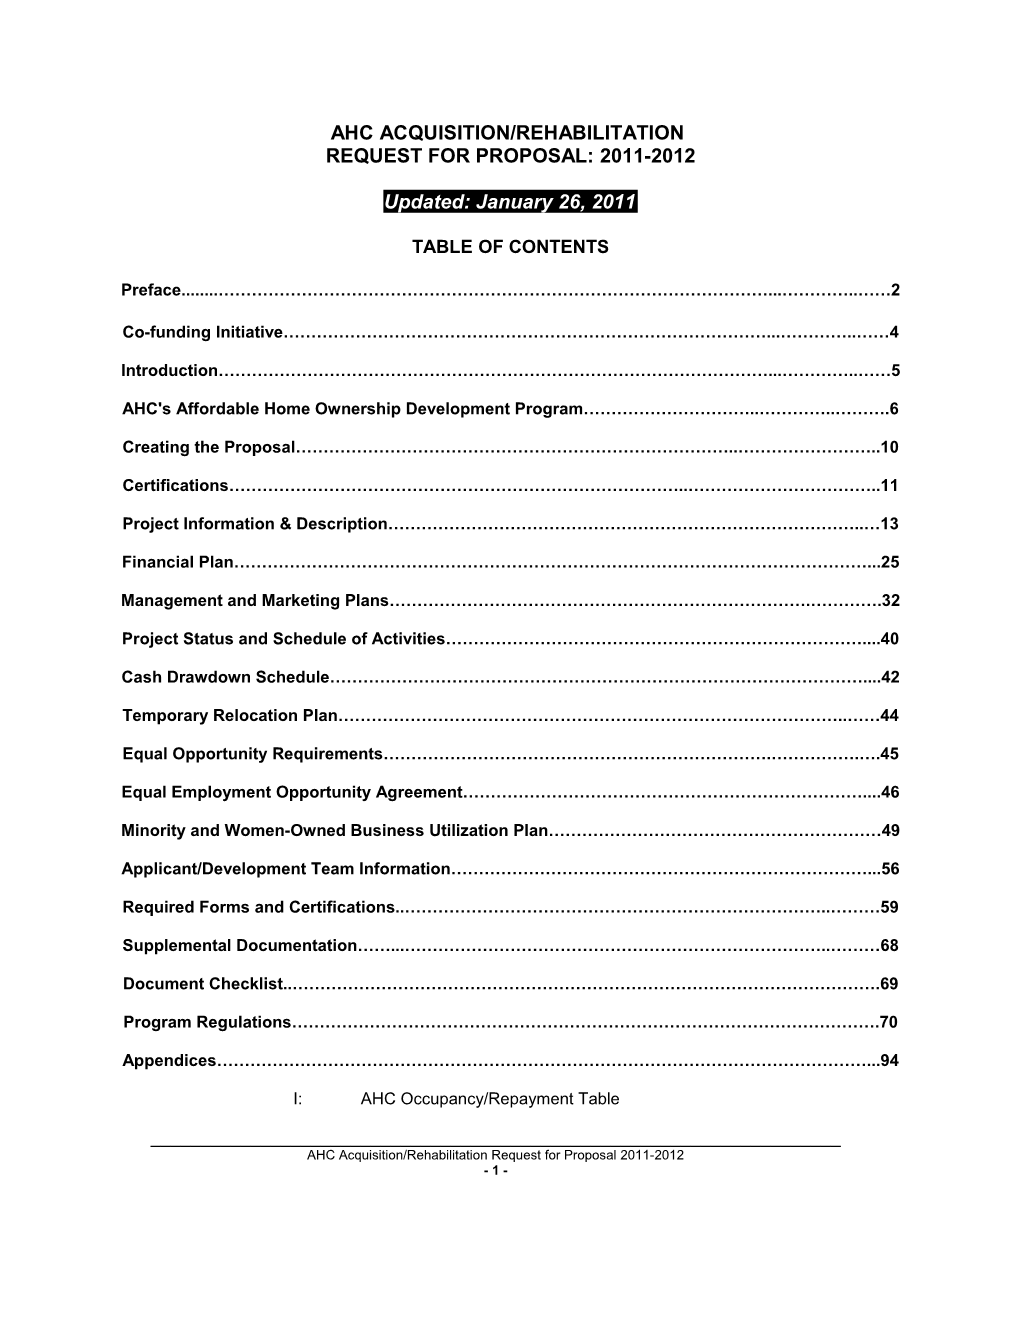 Table of Contents s559